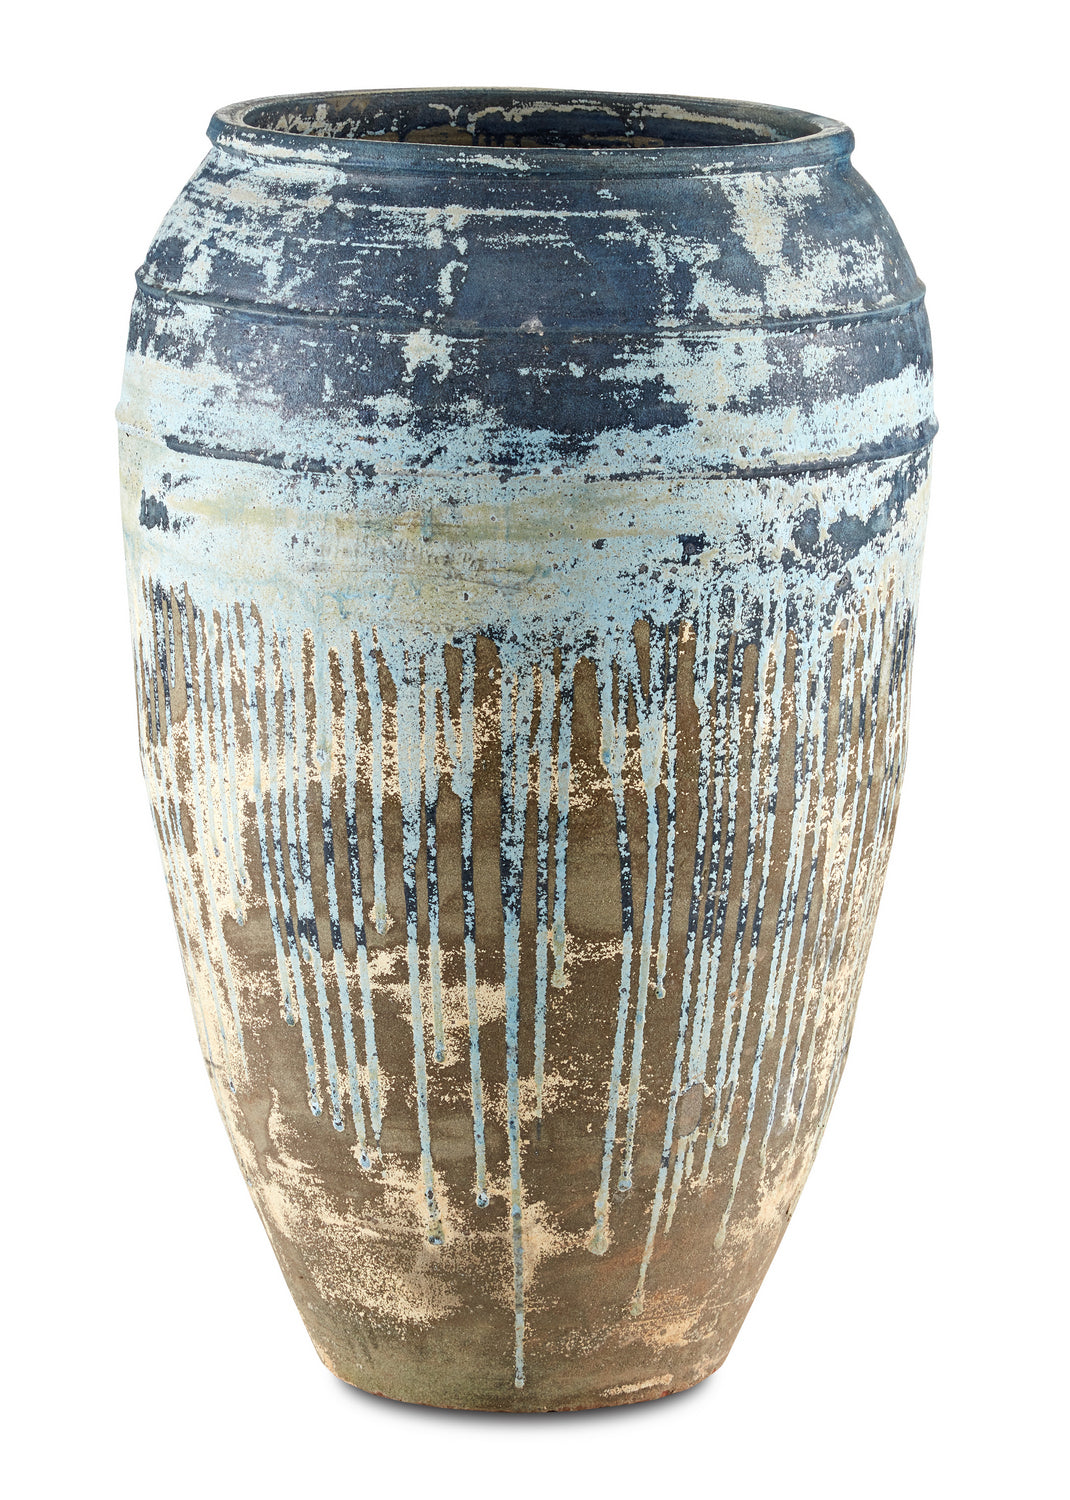 Planter from the Catania collection in Greenish/Milky White/Blue Drip finish